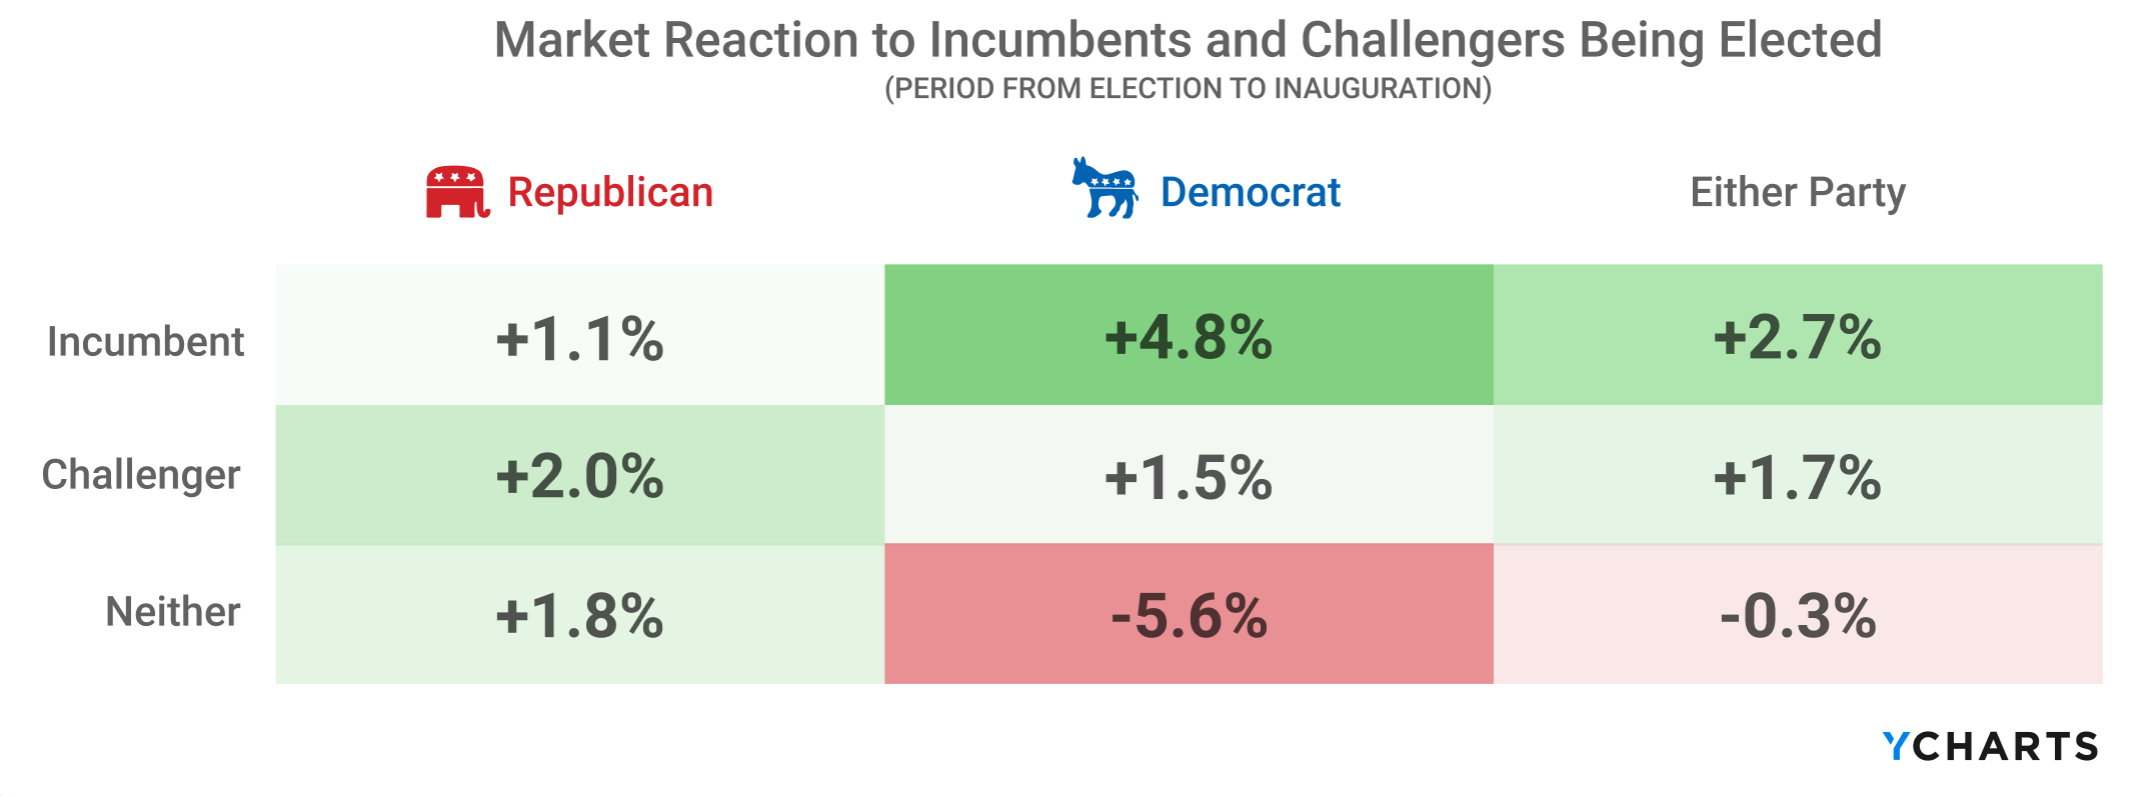 Market Reaction to Incumbents and Challengers Being Elected